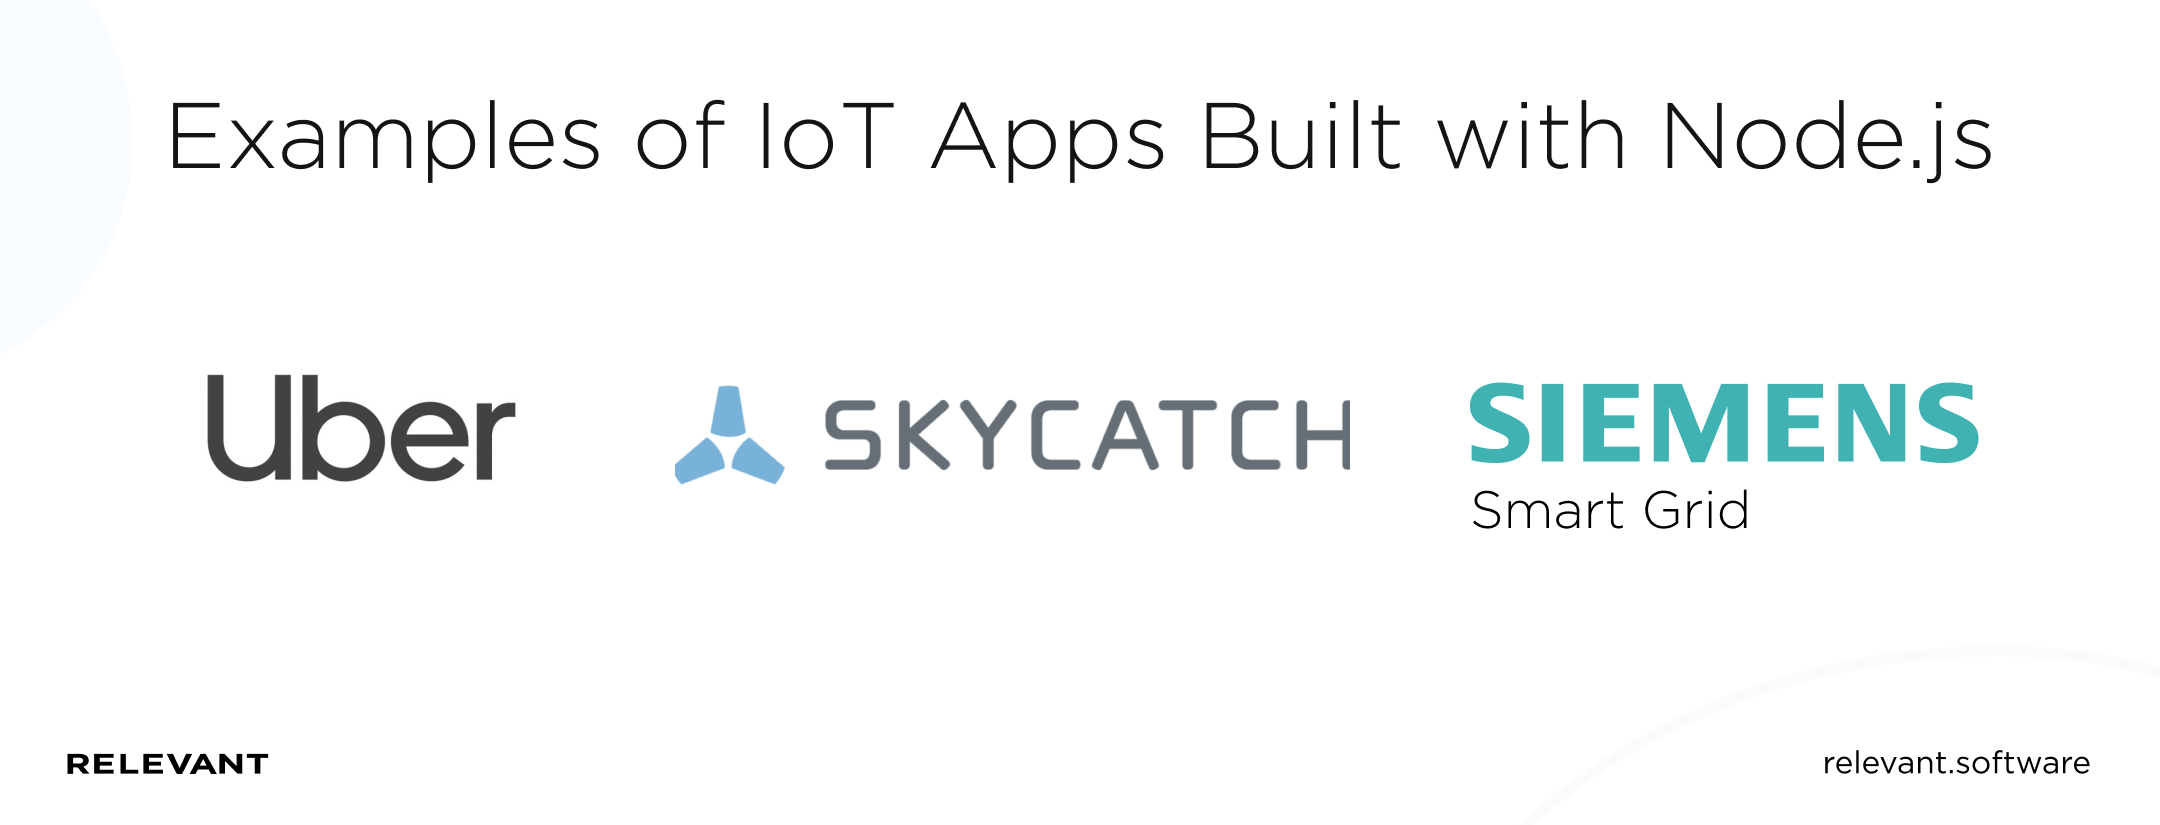 Examples of IoT apps built with Node.js